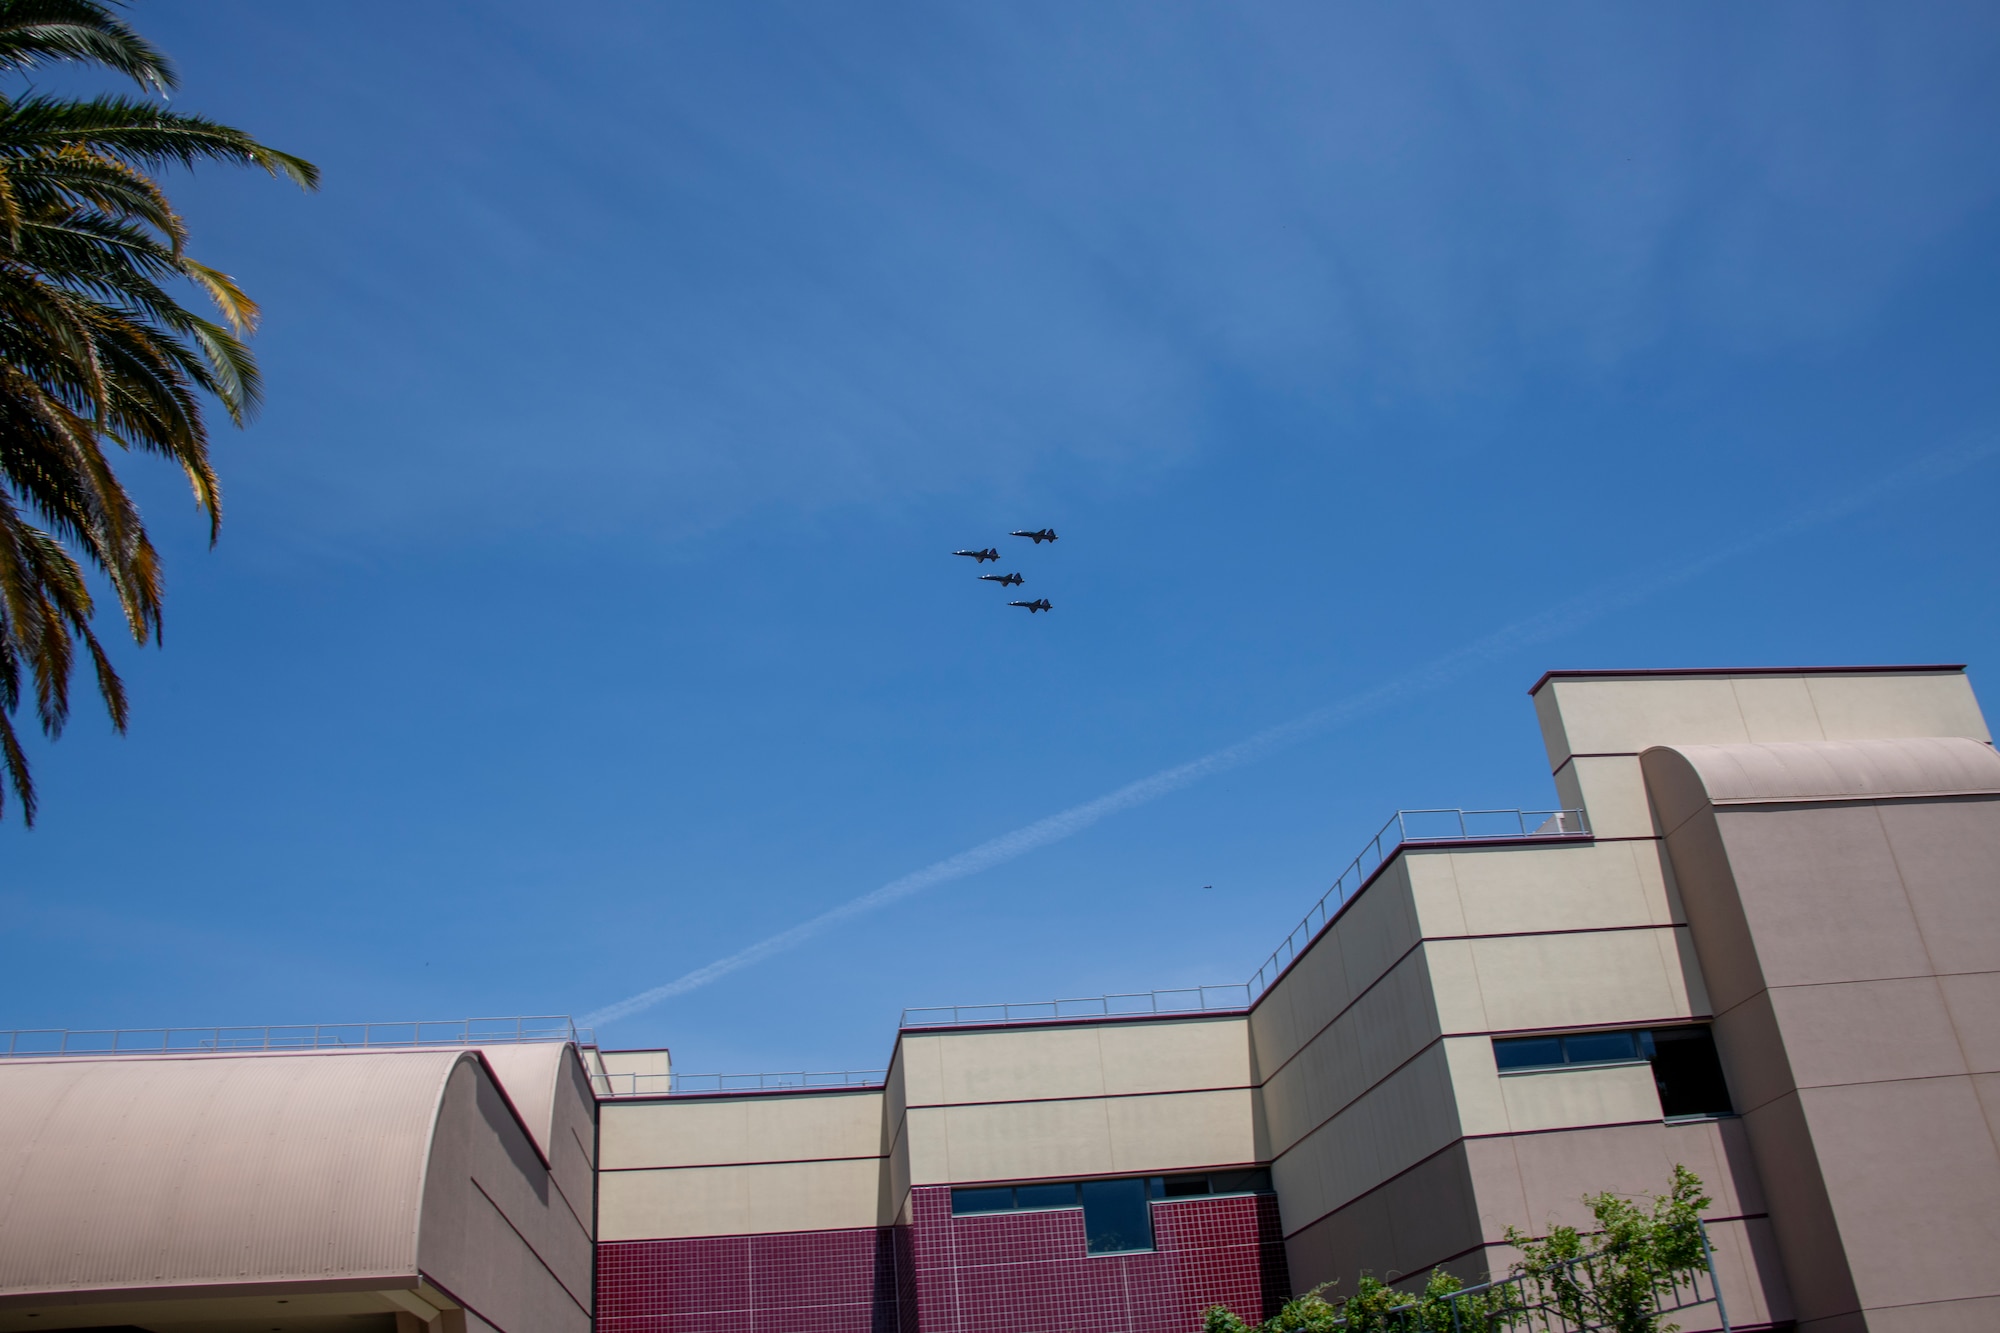 U.S. Air Force T-38A Talons assigned to the 9th Reconnaissance Wing at Beale Air Force Base, California, fly over David Grant USAF Medical Center during an Operation American Resolve flyover May 9, 2020, at Travis Air Force Base, California. The flyover was conducted to salute healthcare workers and first responders in Northern California cities impacted by COVID-19. (U.S. Air Force photo by Tech. Sgt. James Hodgman)